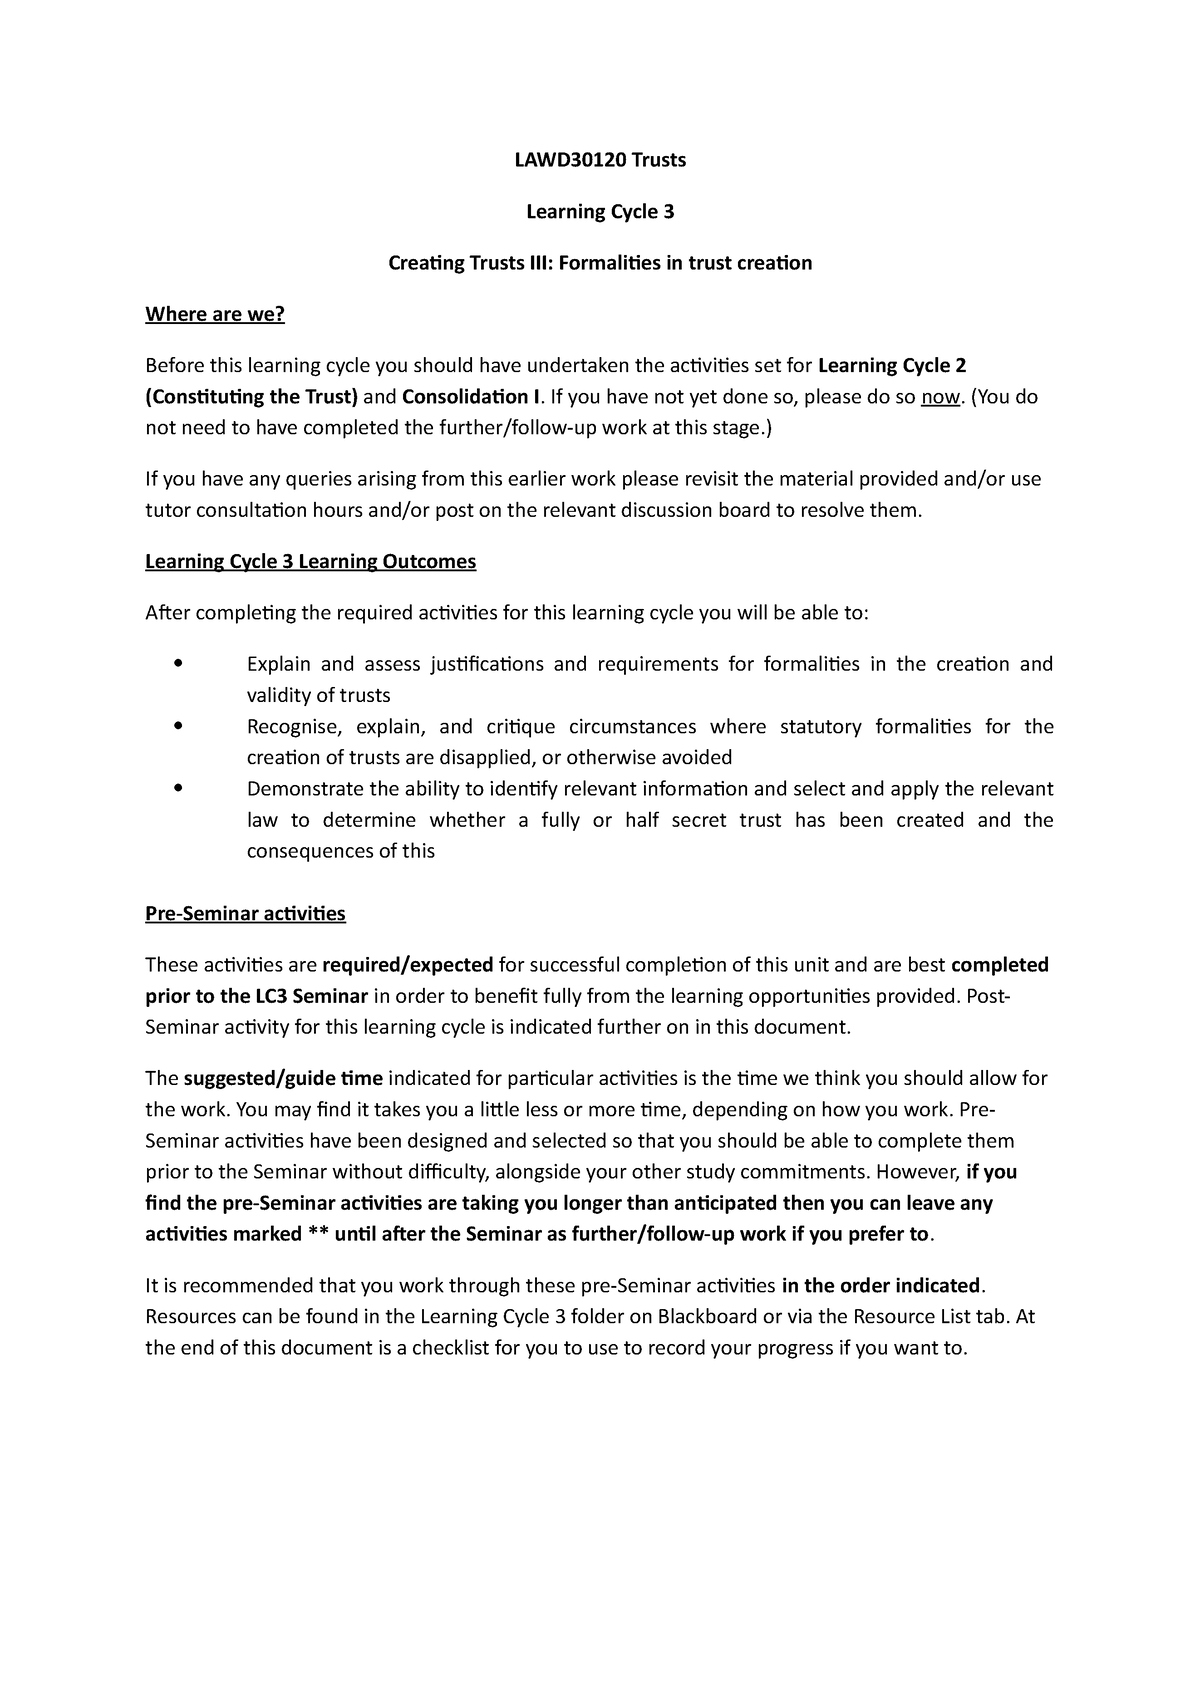 Trusts Learning Cycle 3 Worksheet 22-23 - LAWD30120 Trusts Learning ...